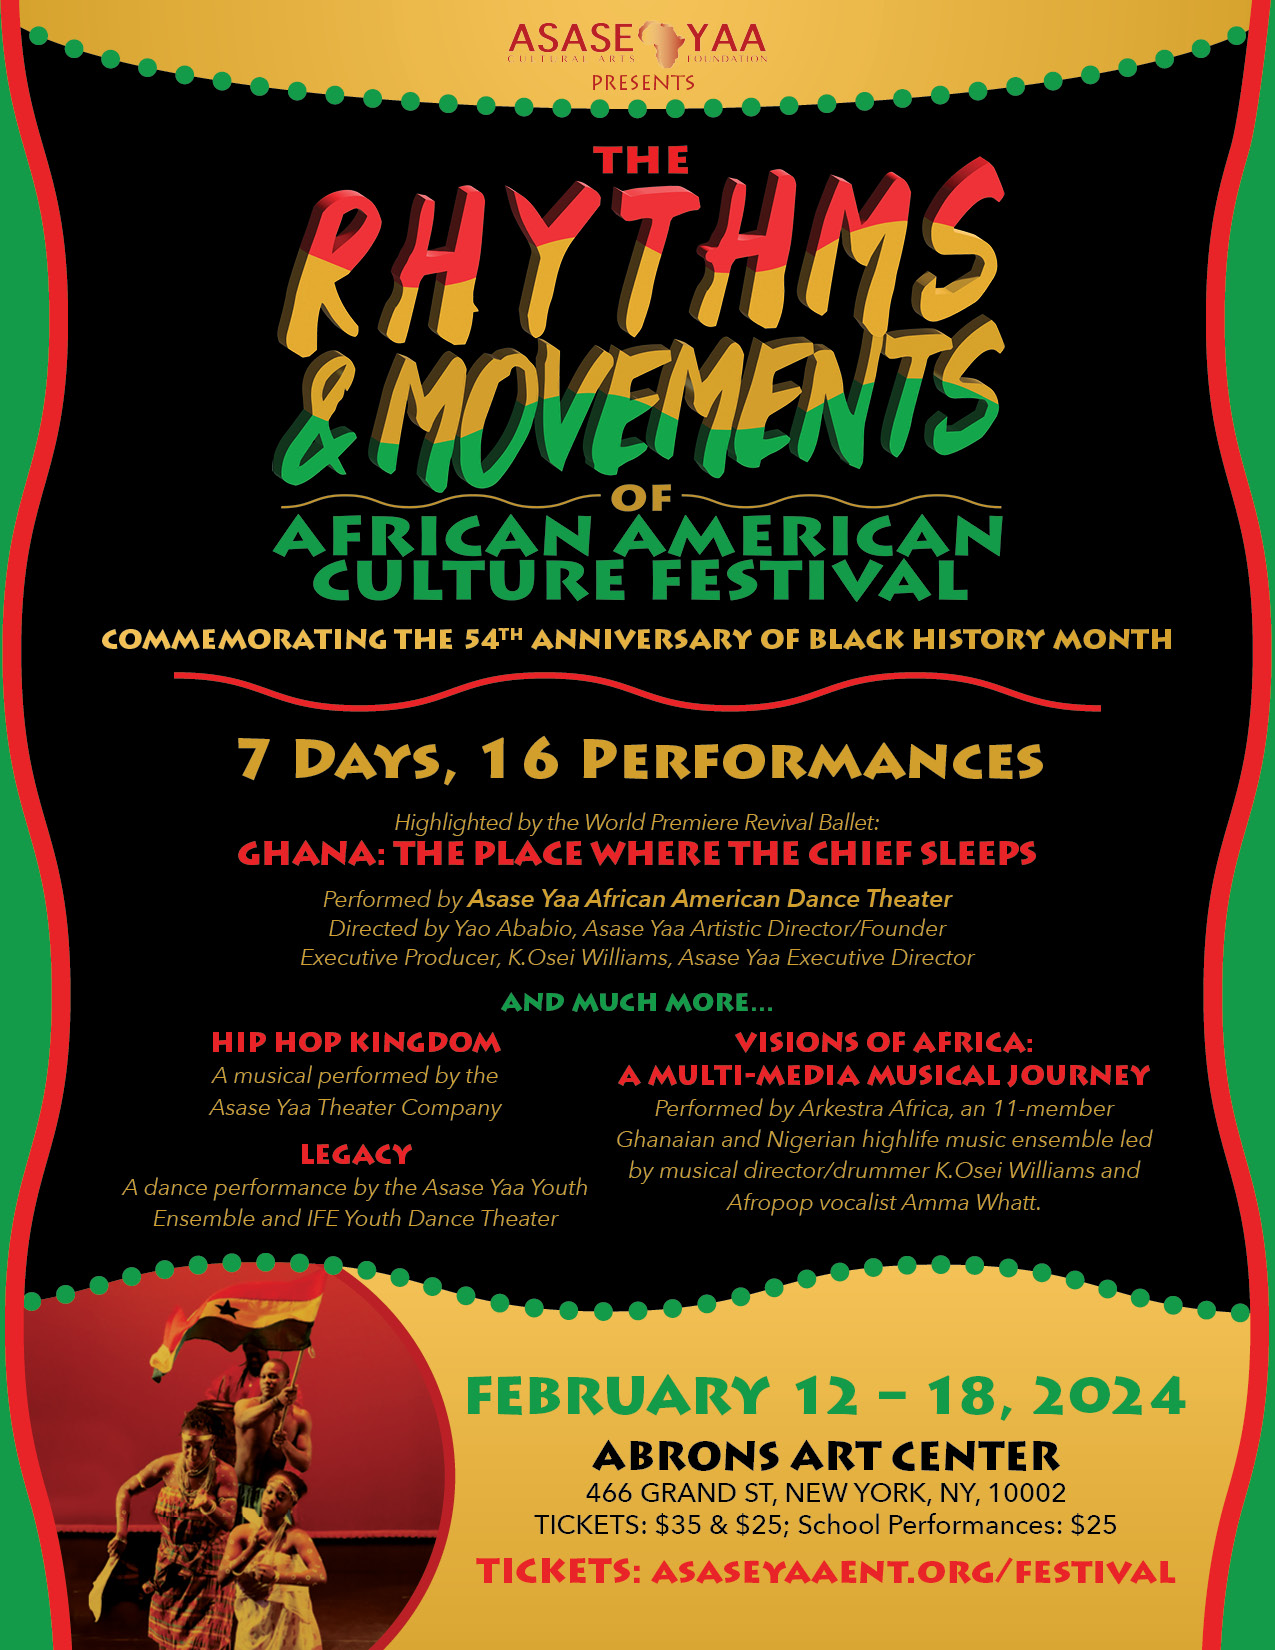 The Rhythms & Movements of African American Culture Festival